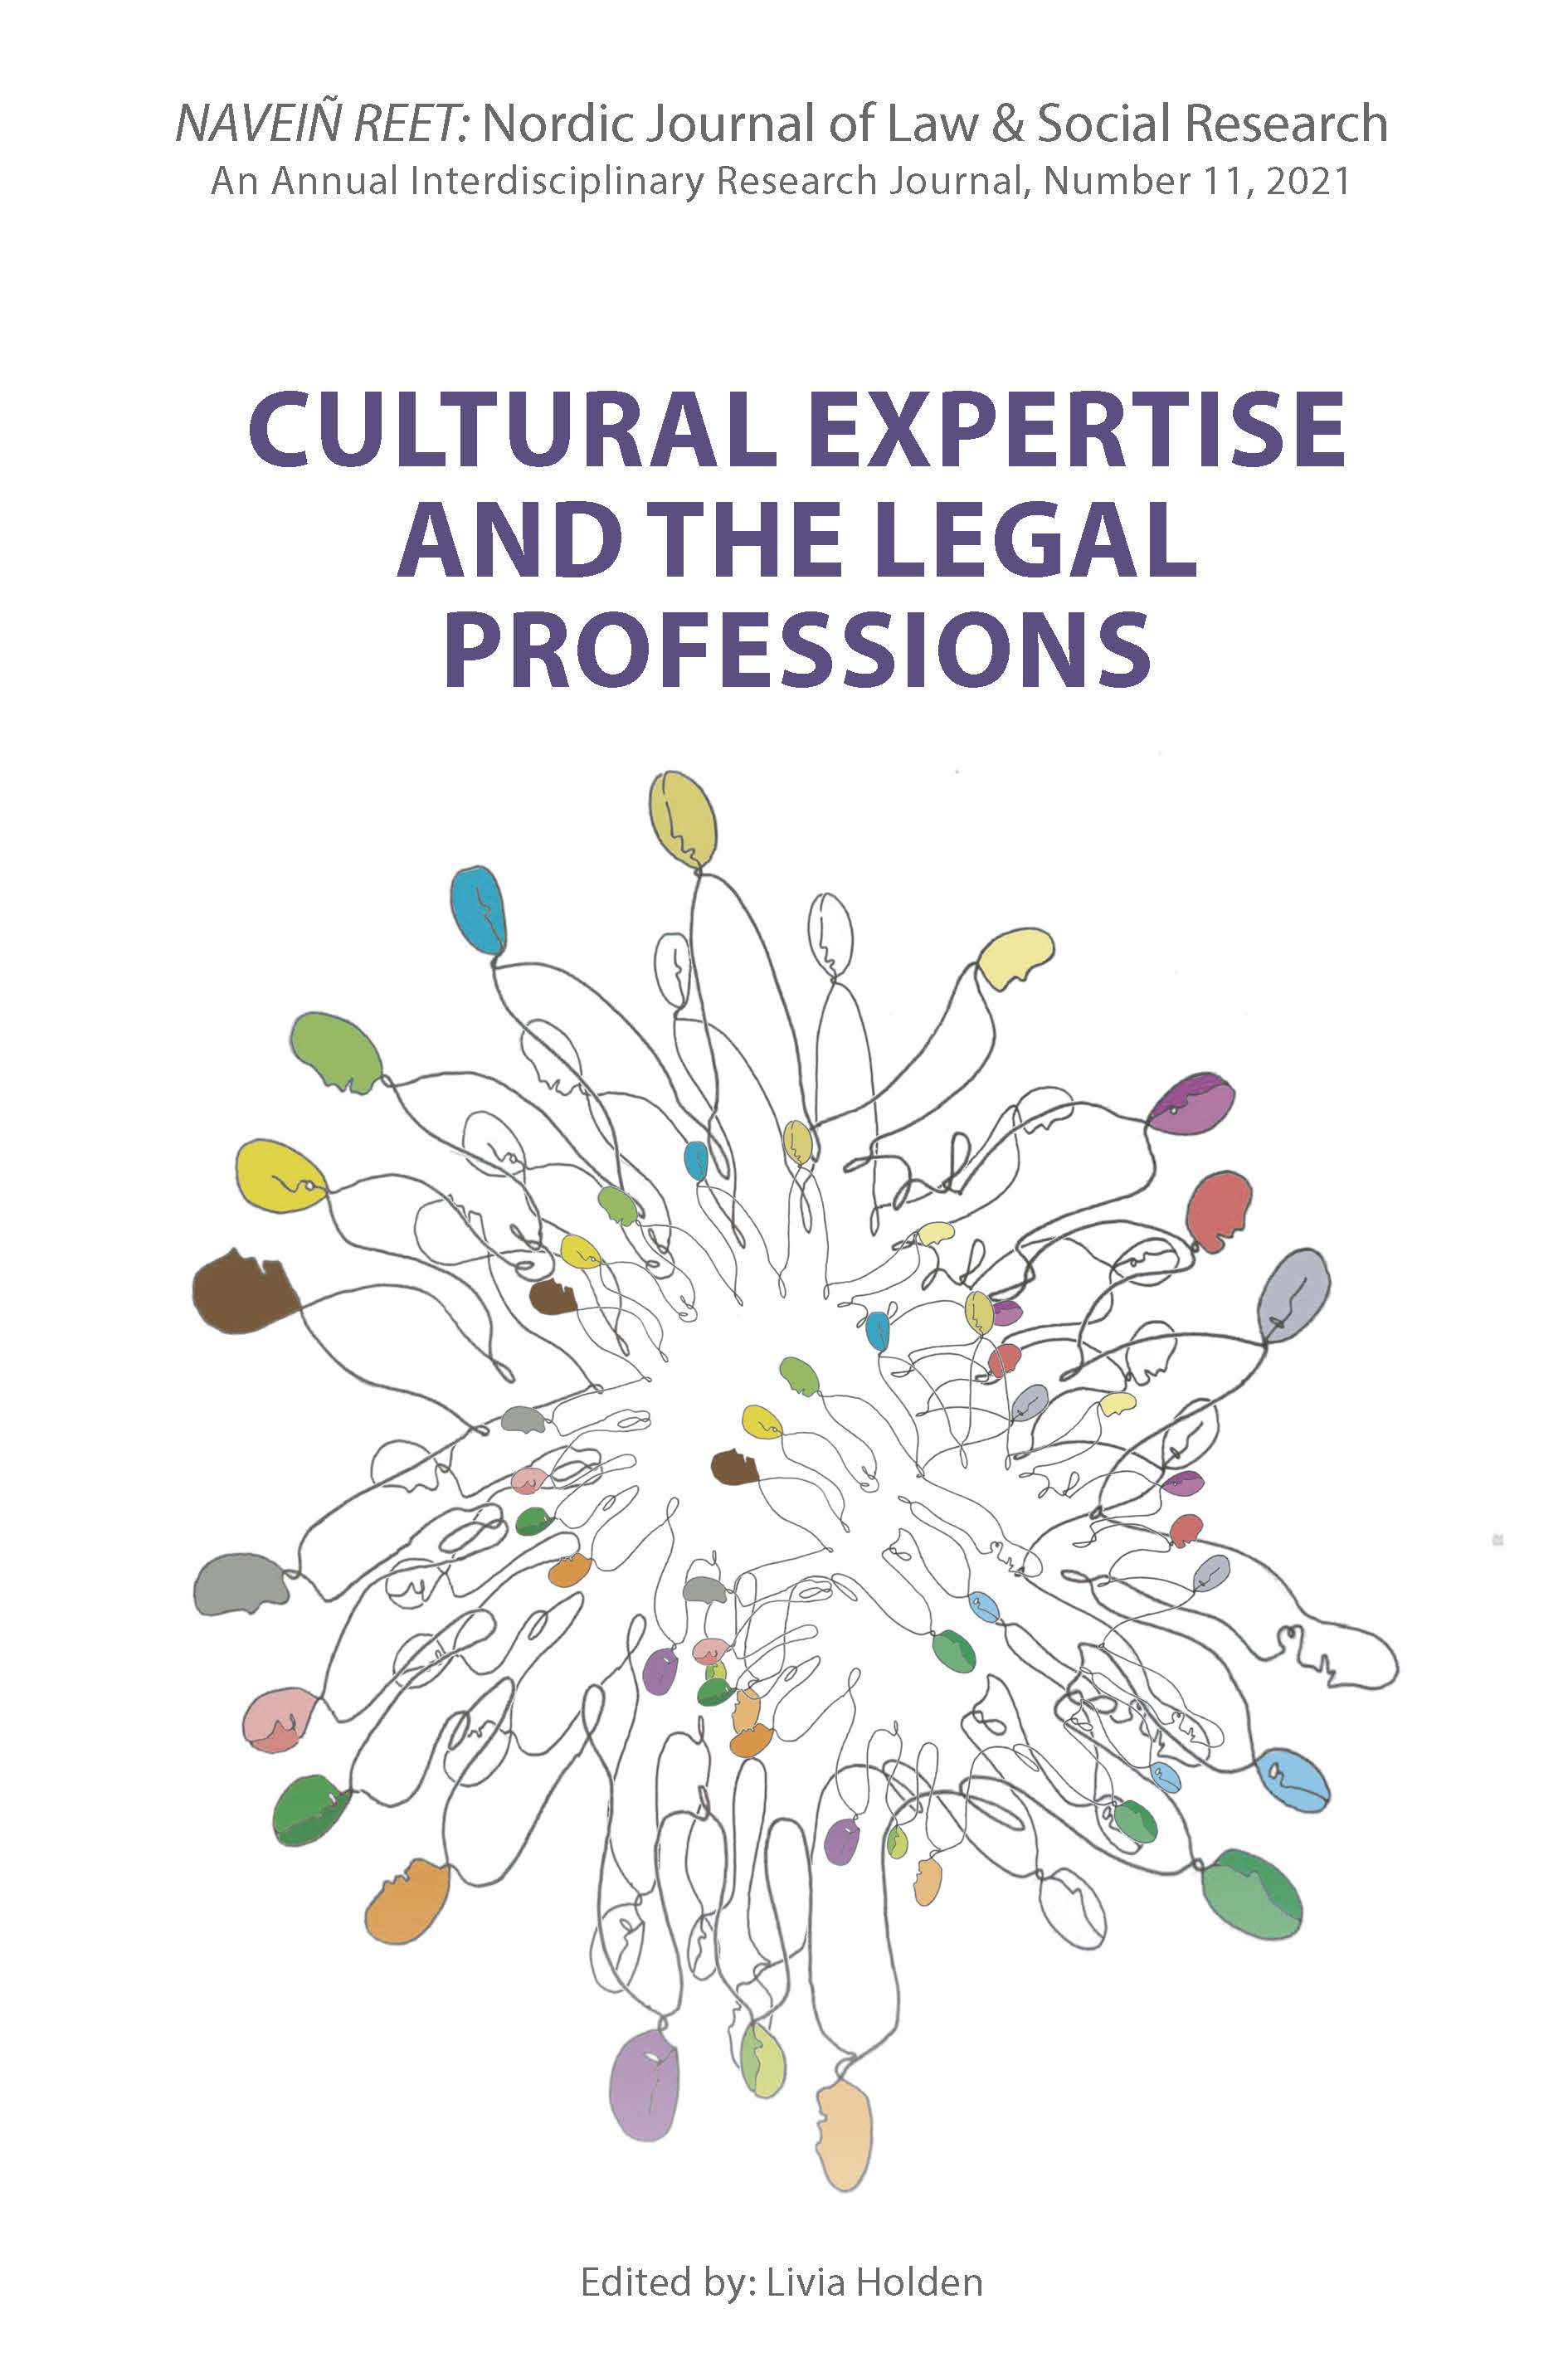 					View No. 11 (2021): NAVEIÑ REET: Nordic Journal of Law & Social Research: Cultural Expertise and the Legal Professions
				